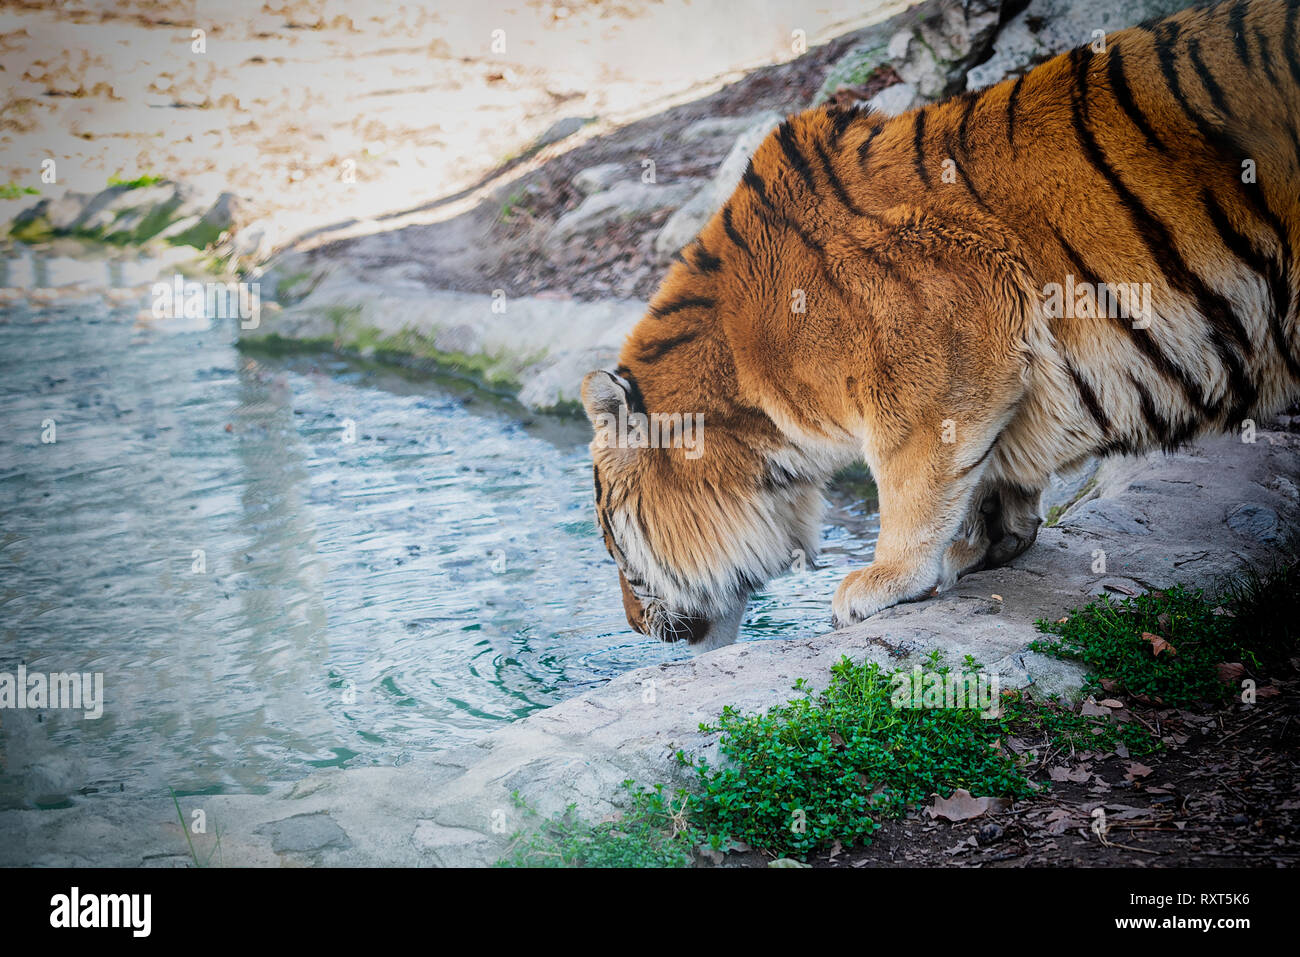 Tiger drink water Stock Photo